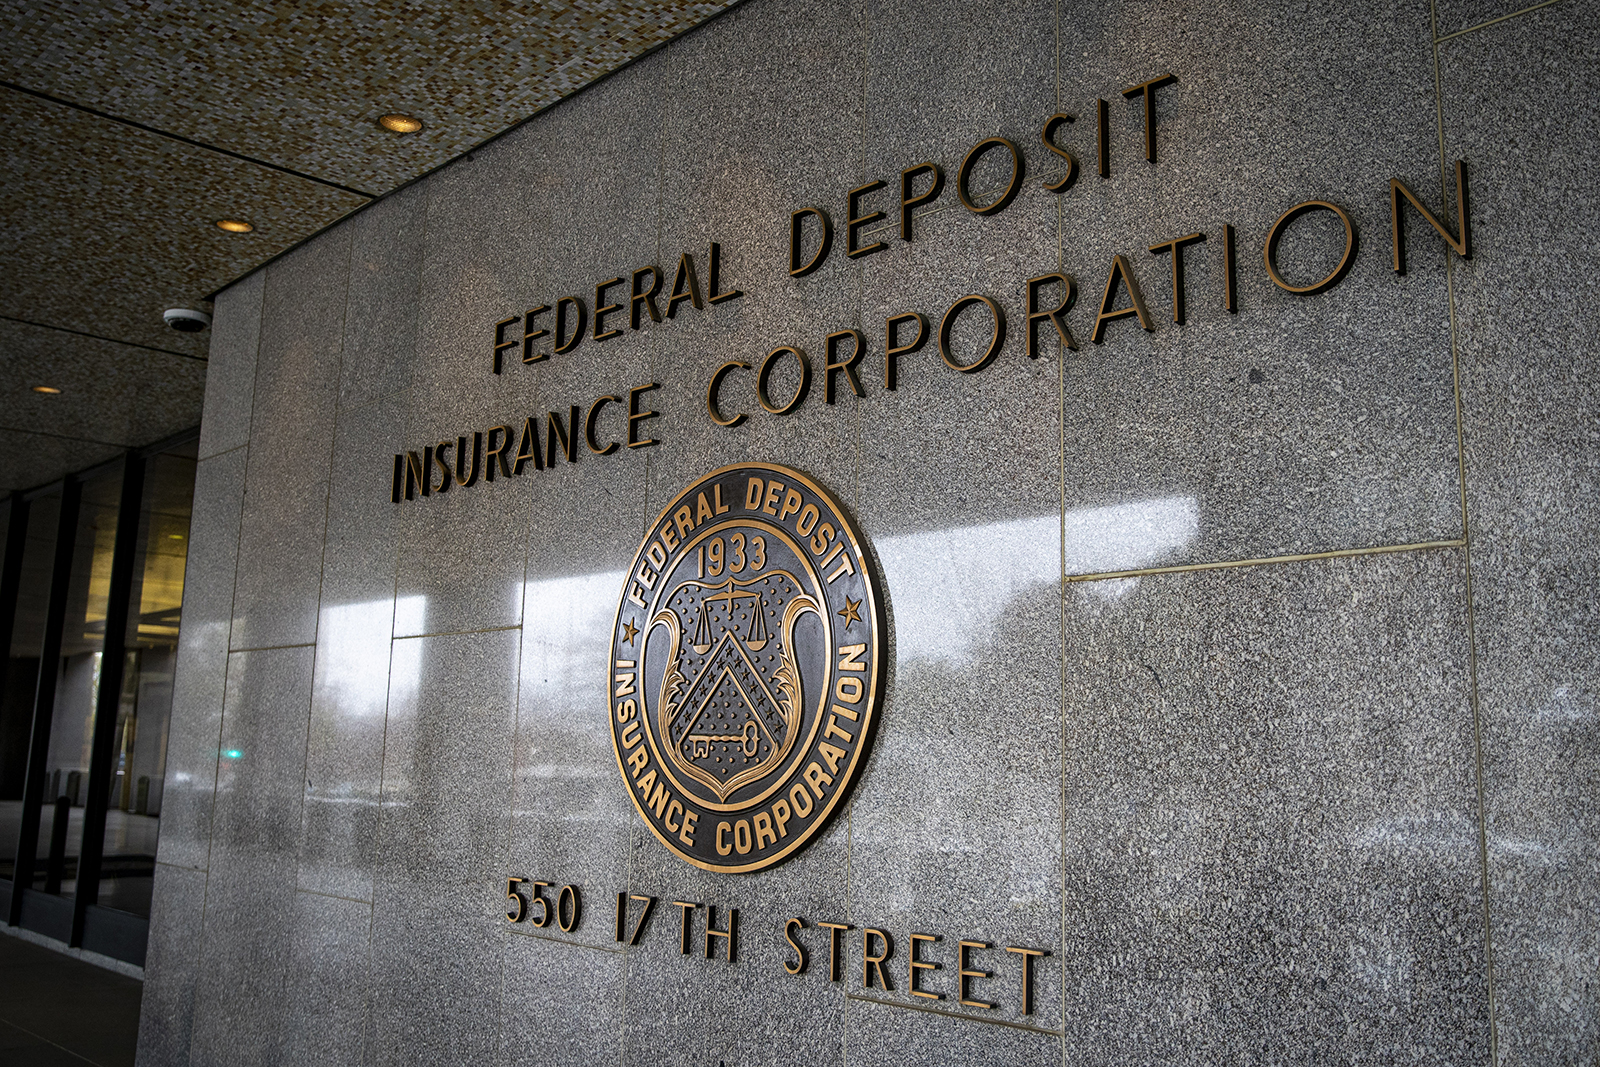 The Federal Deposit Insurance Corp. (FDIC) headquarters in Washington, DC, on Monday, March 13.